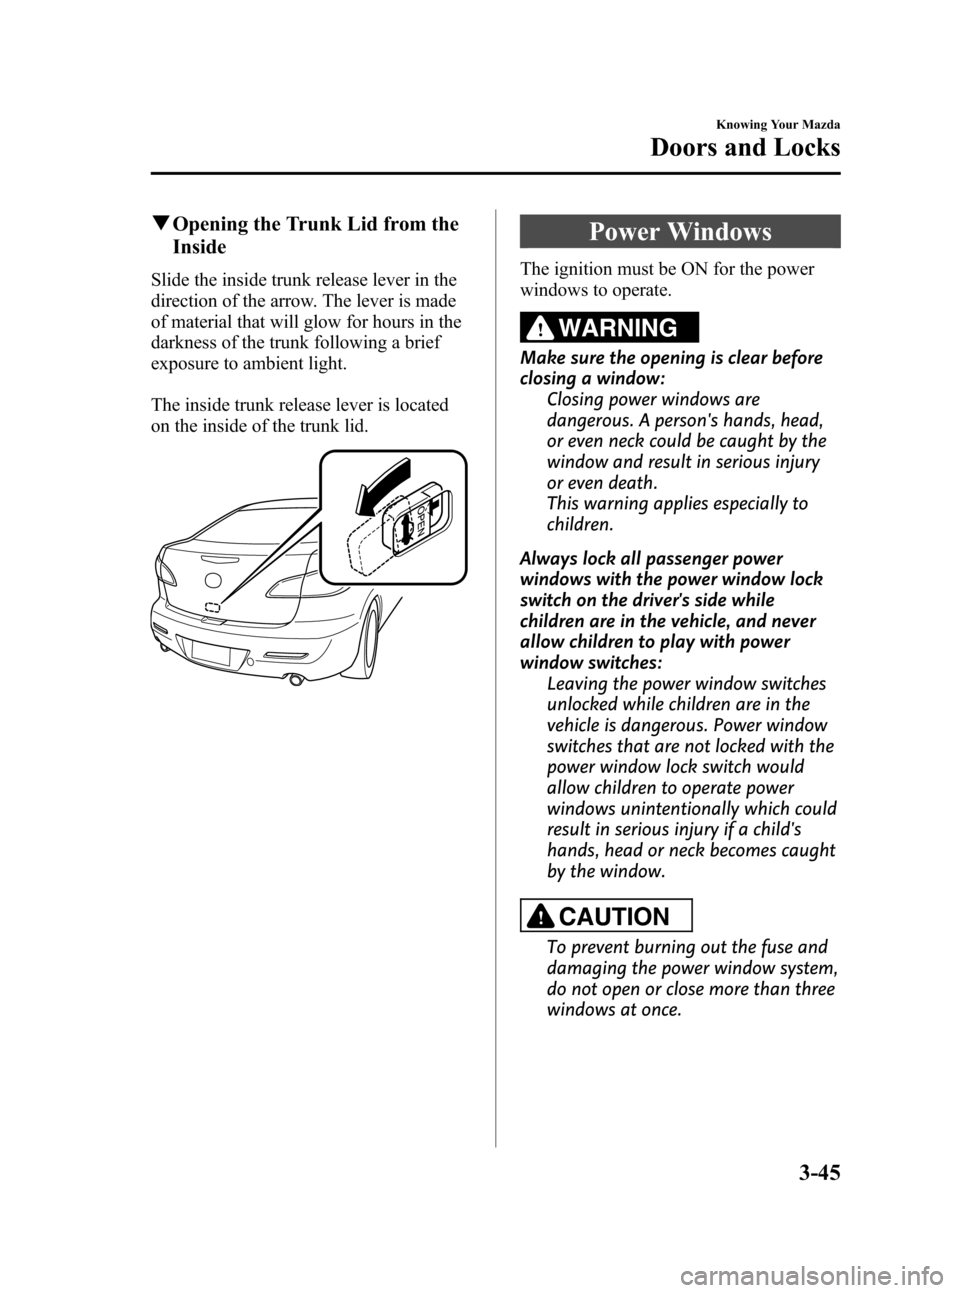 MAZDA MODEL 3 HATCHBACK 2010  Owners Manual (in English) Black plate (121,1)
qOpening the Trunk Lid from the
Inside
Slide the inside trunk release lever in the
direction of the arrow. The lever is made
of material that will glow for hours in the
darkness of